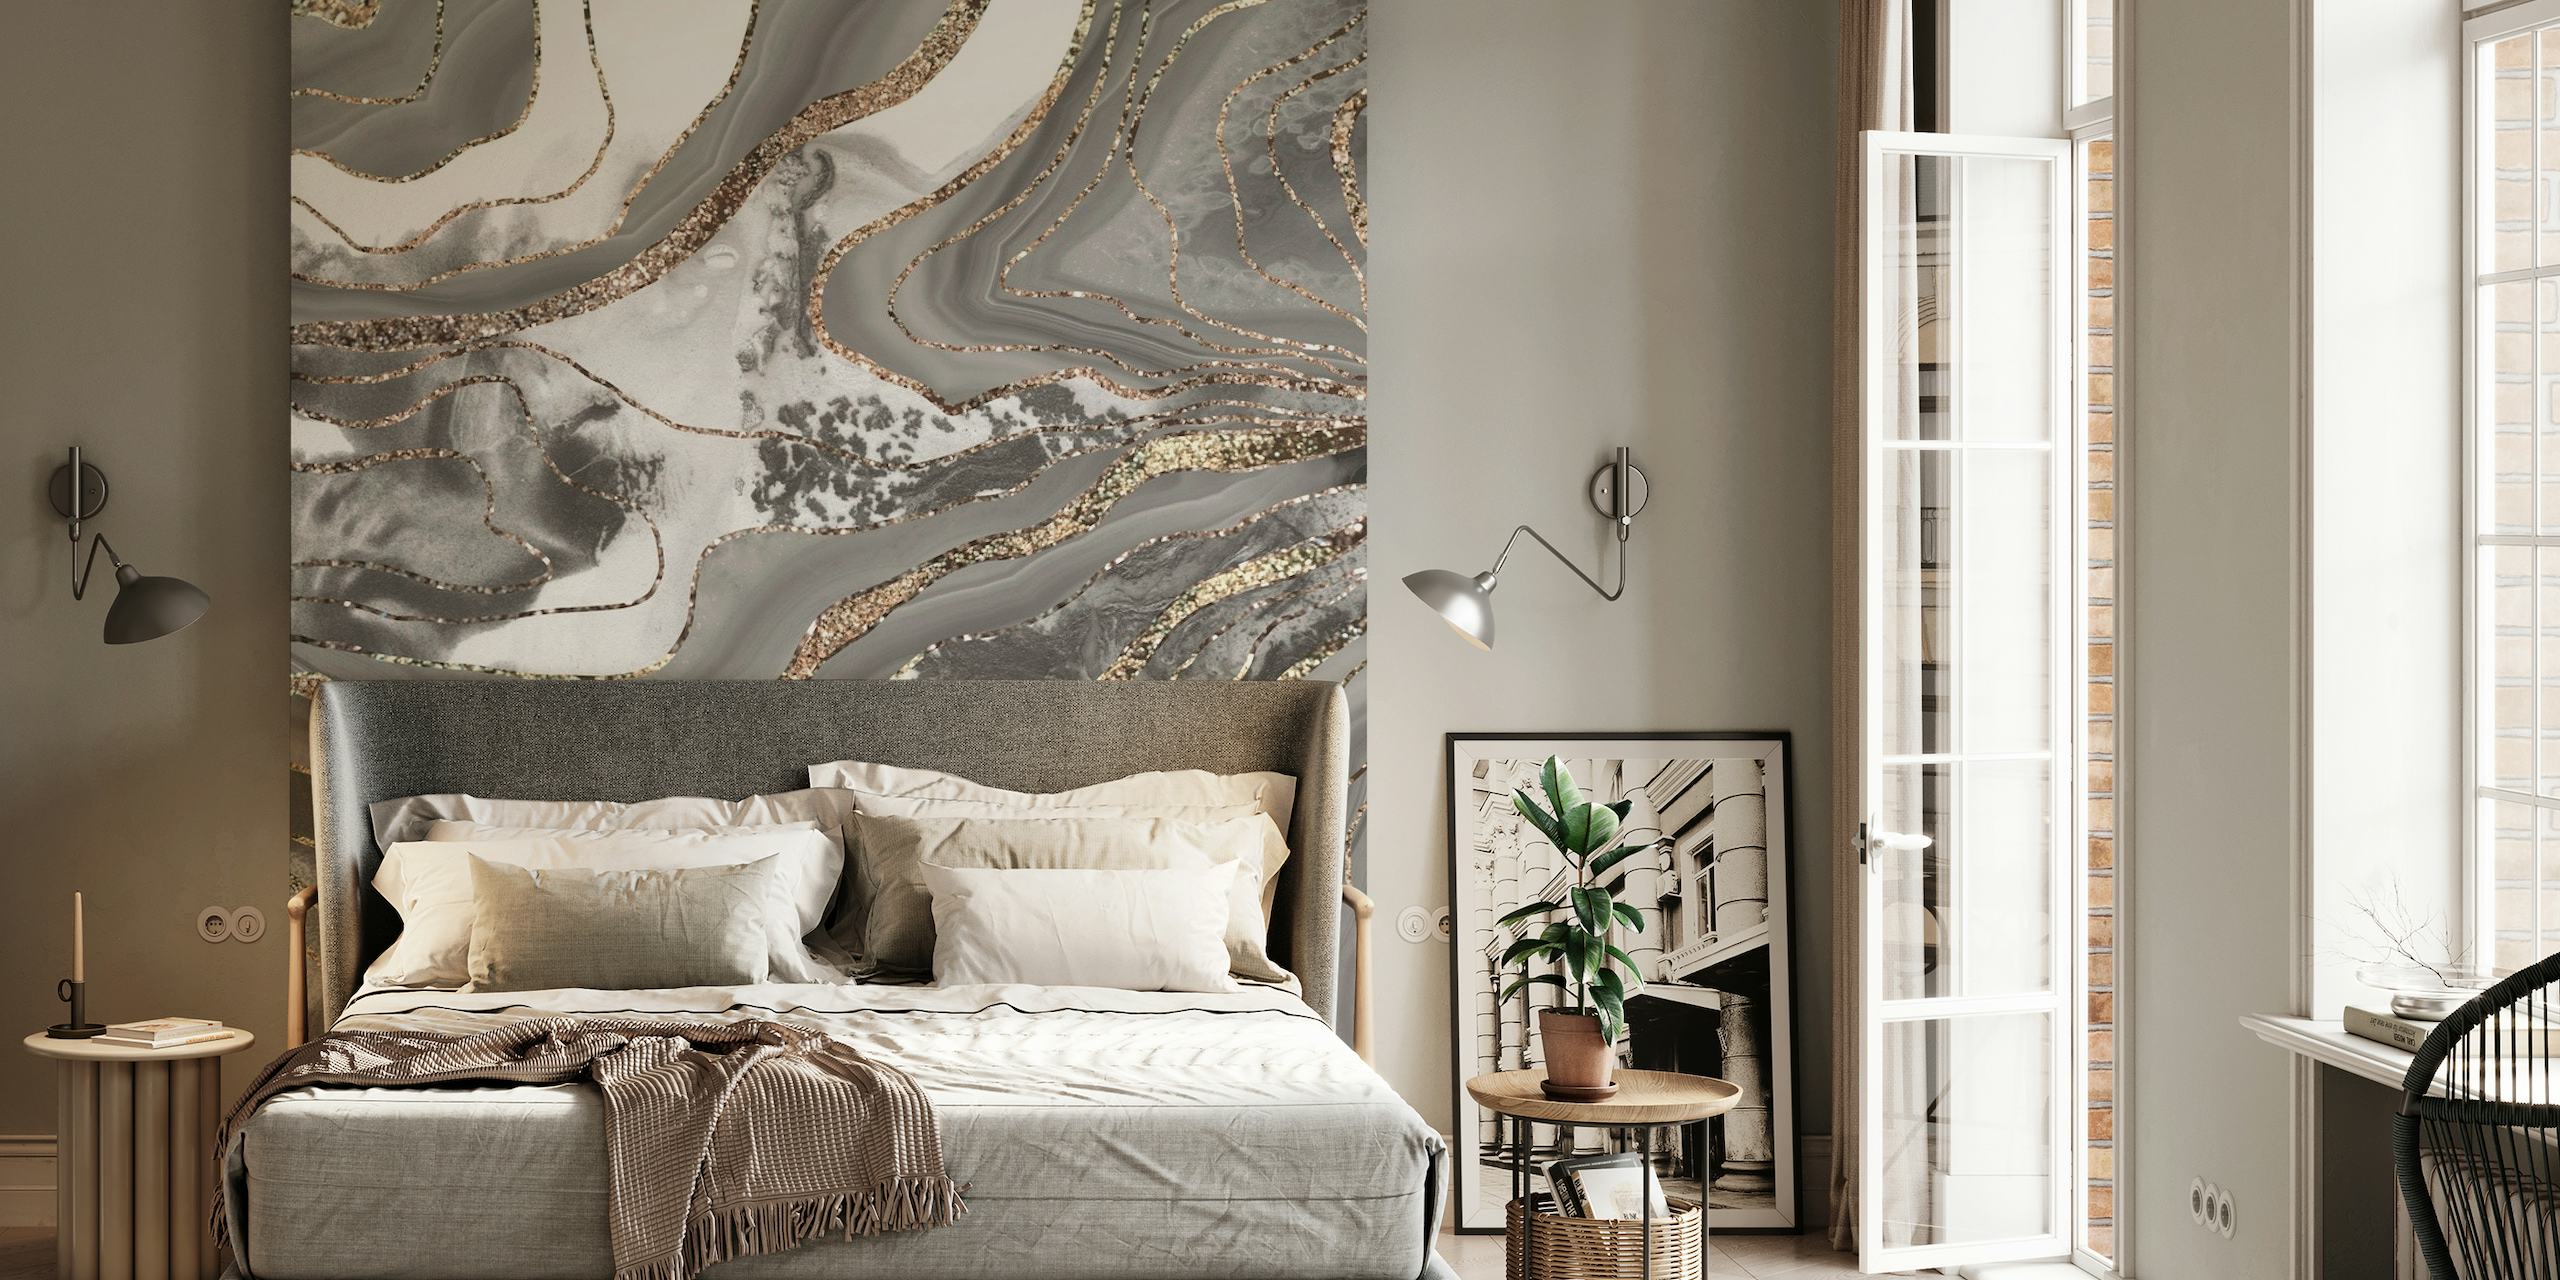 Elegant liquid marble agate wall mural with grey, white, and gold patterns